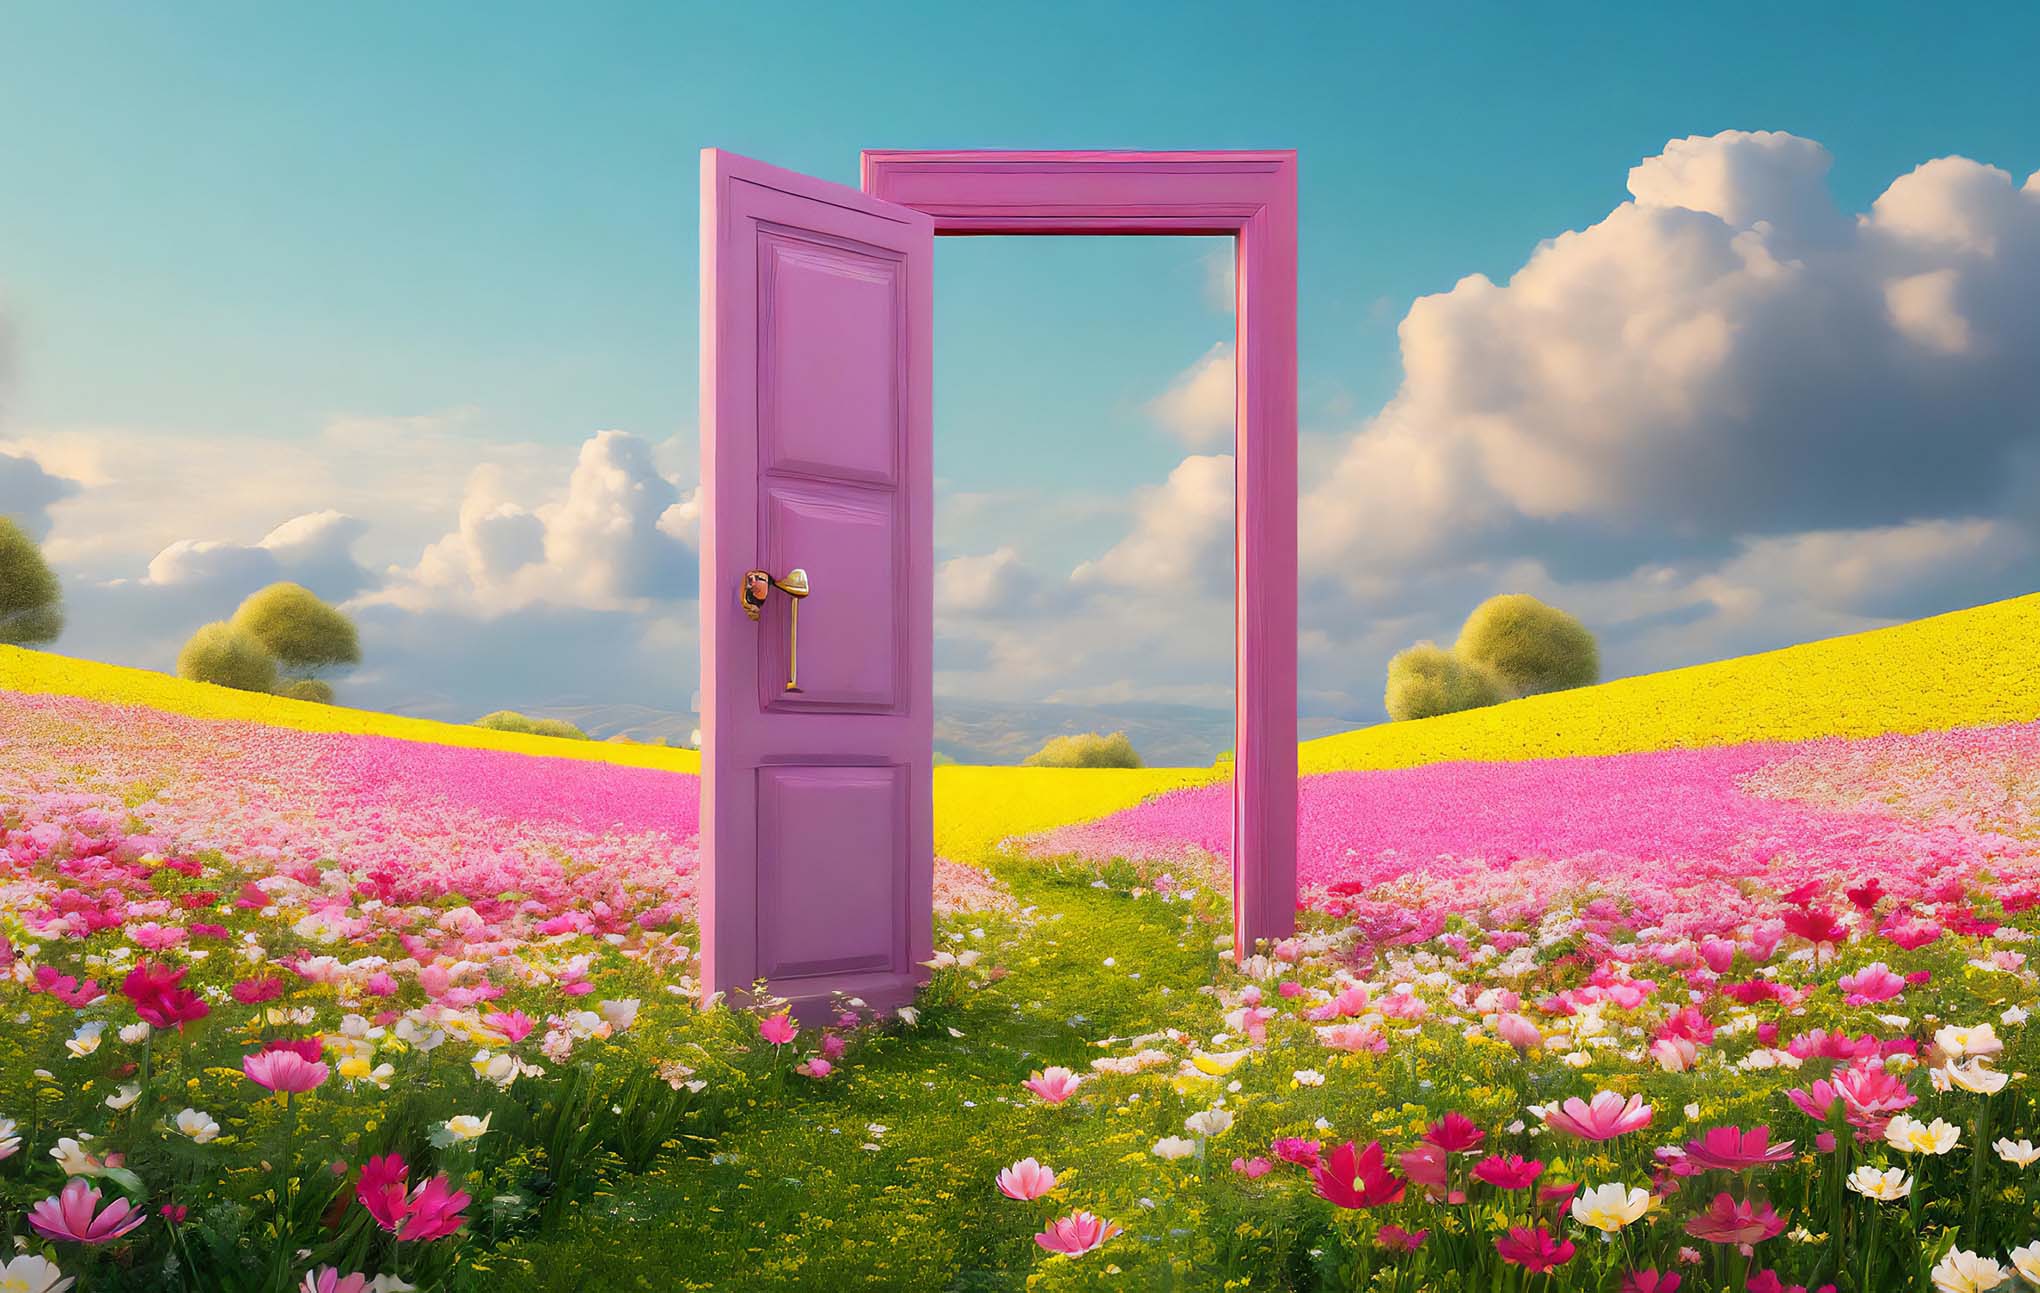 5forests A vibrant, surreal landscape featuring a pink door standing open in a colorful meadow under a blue sky with fluffy clouds. This customer-first marketing vision is realized in the meadow divided into yellow and pink